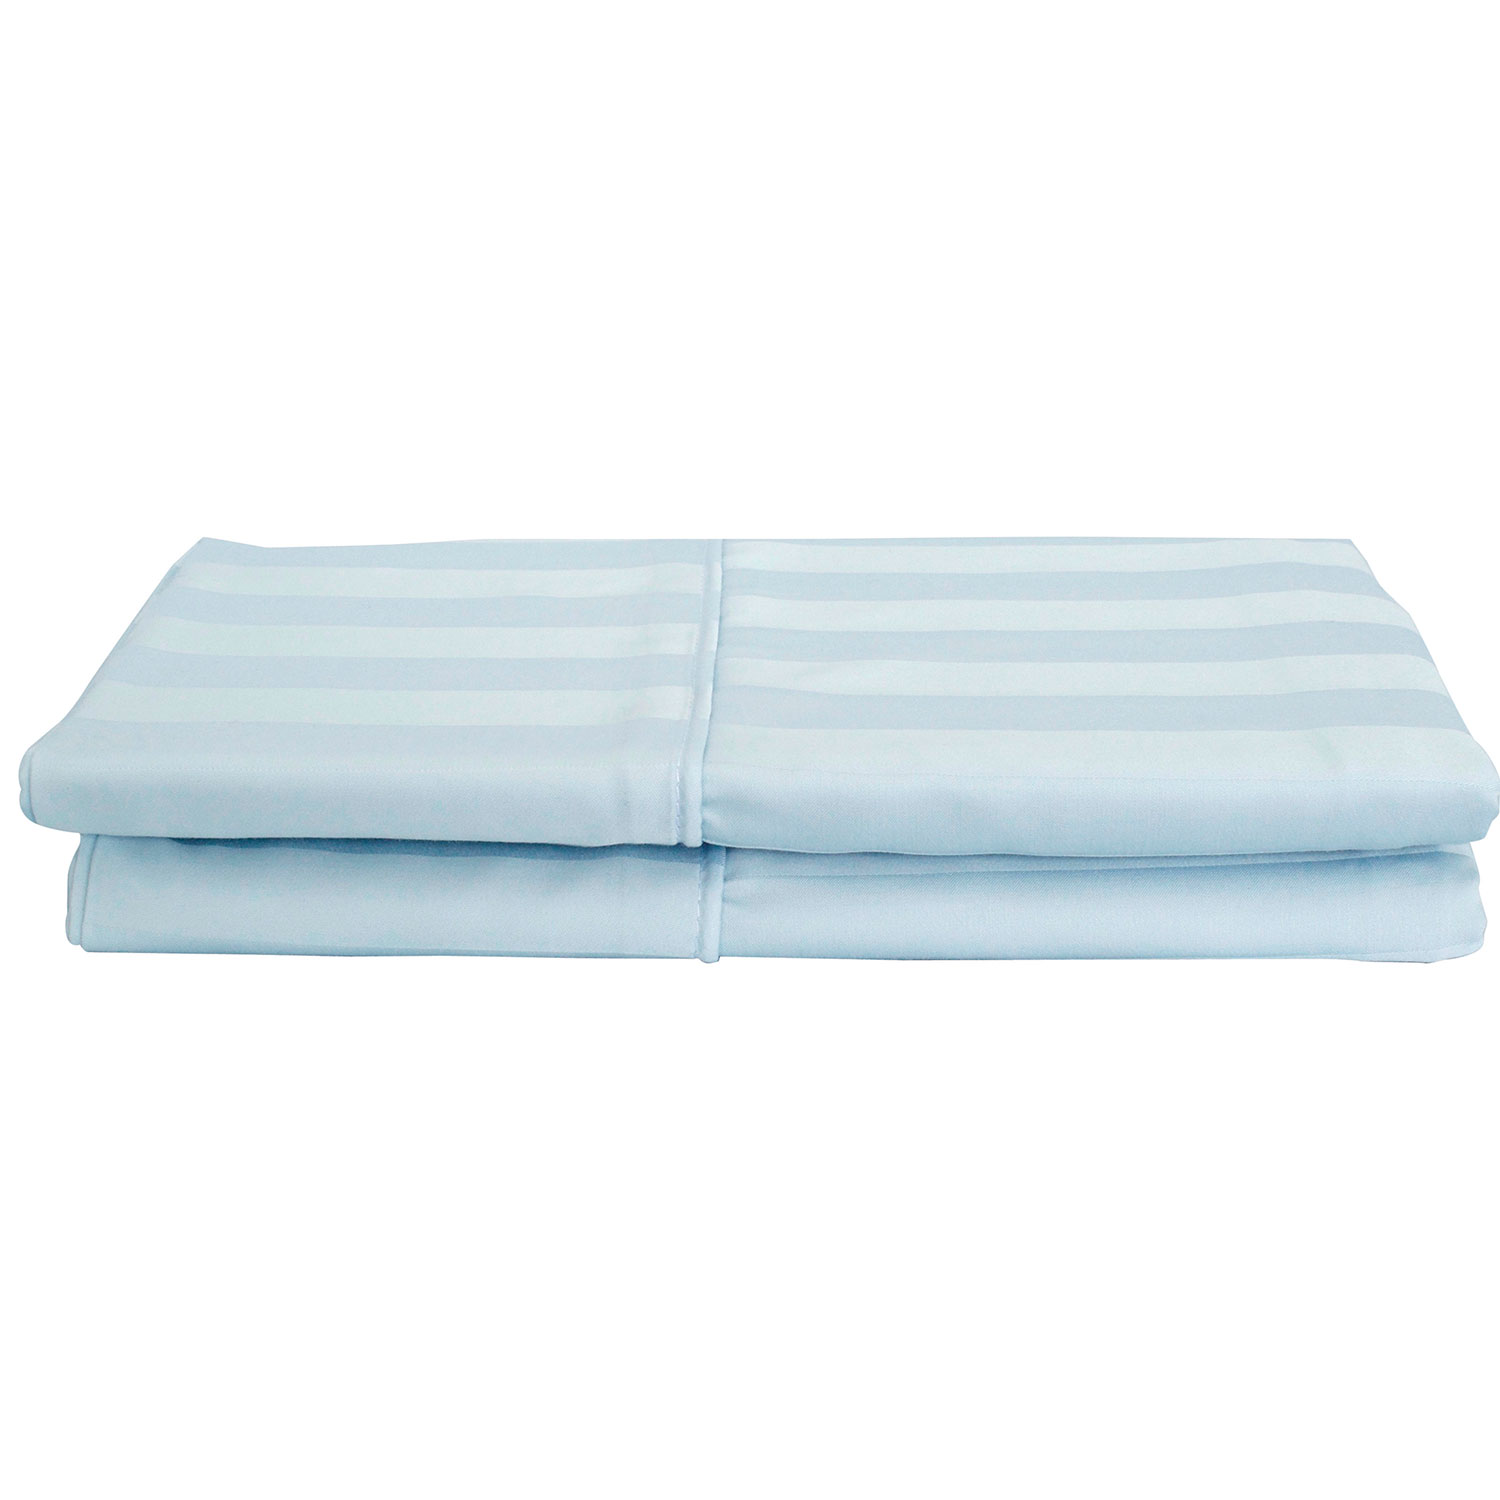 Maholi Damask Stripe Collection 310 Thread Count Rayon Pillow Case - 2 Pack - Queen - Blue